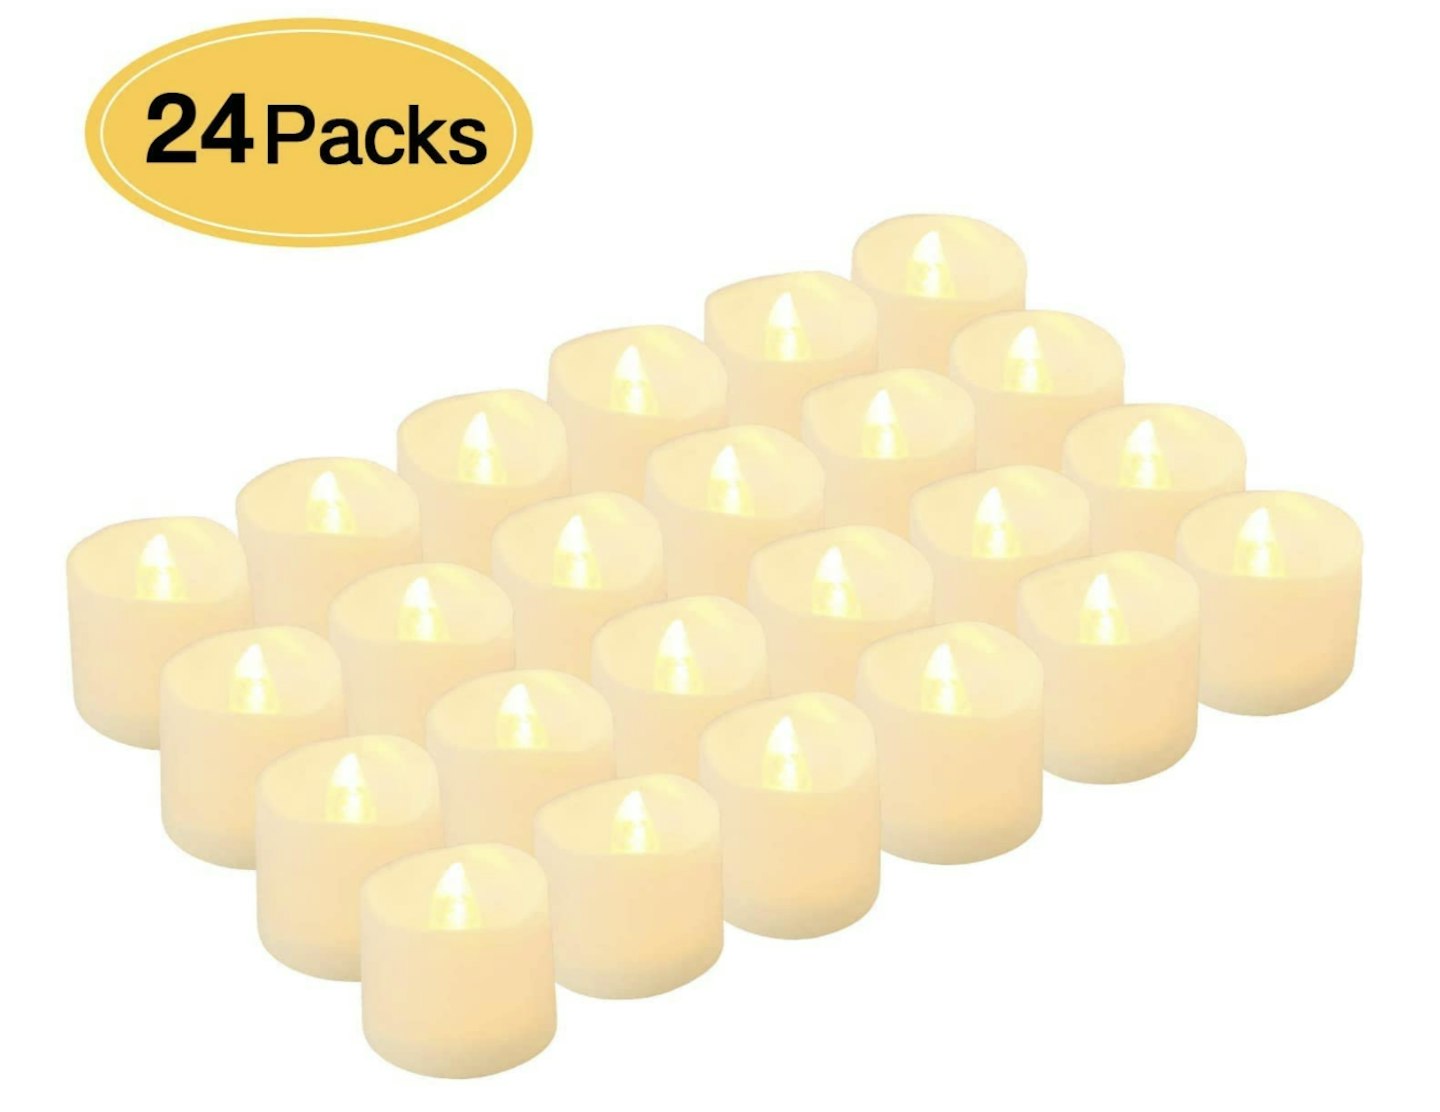 Kohree LED Tea Lights Candles, 24 Pack Flameless Candles Battery Operated